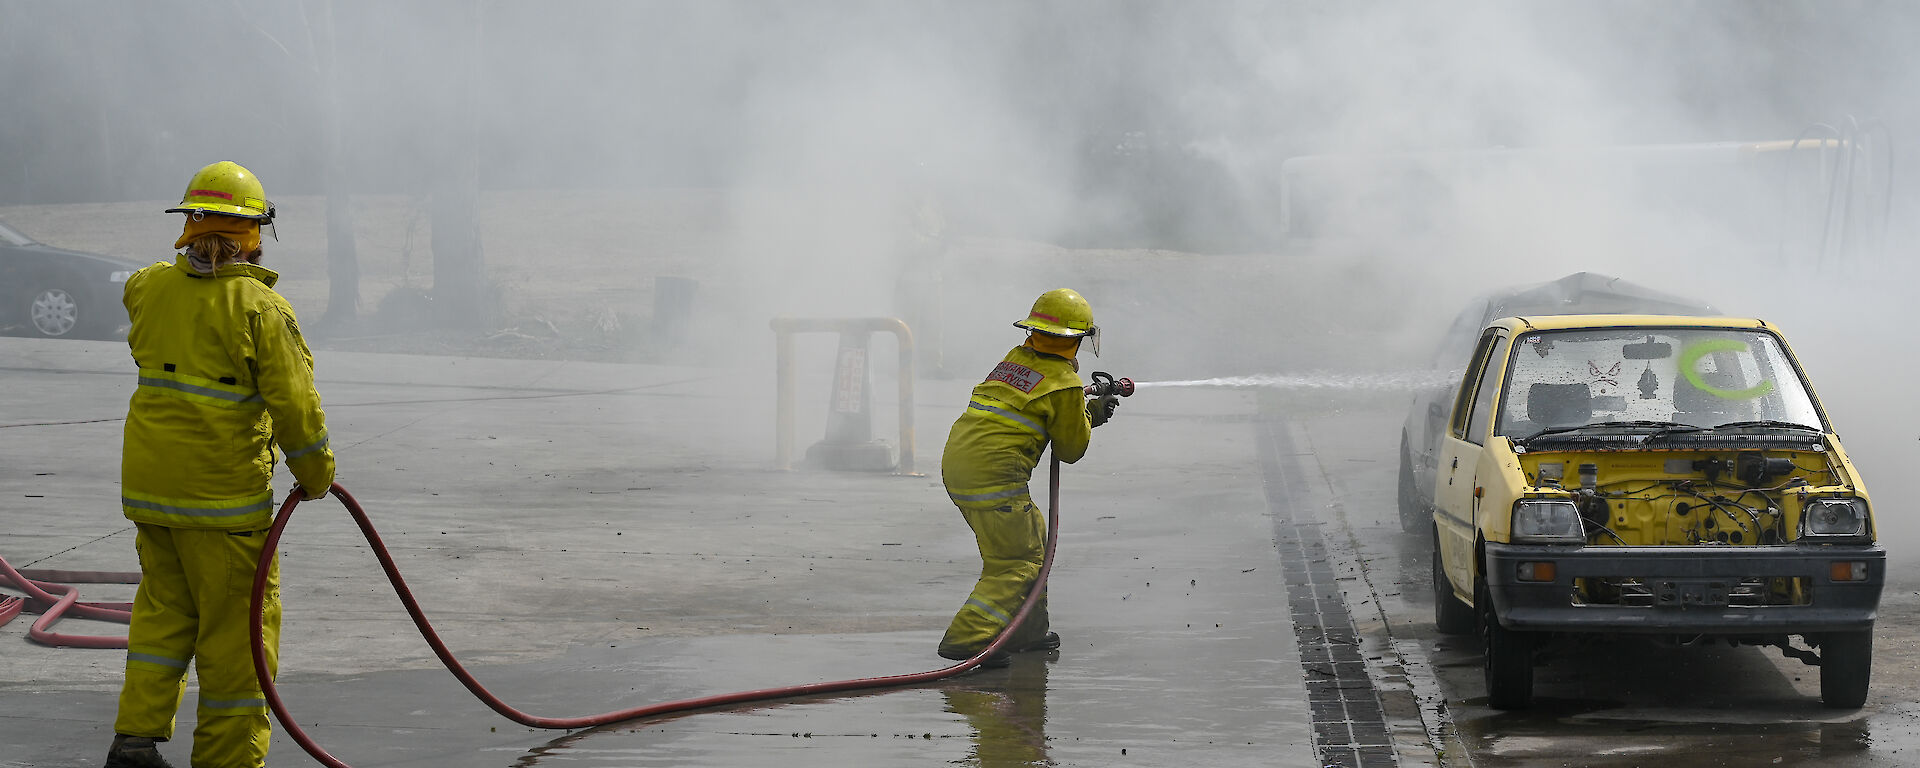 Chef Donna dressed in firefighting attire extinguishes a blazing car at fire training